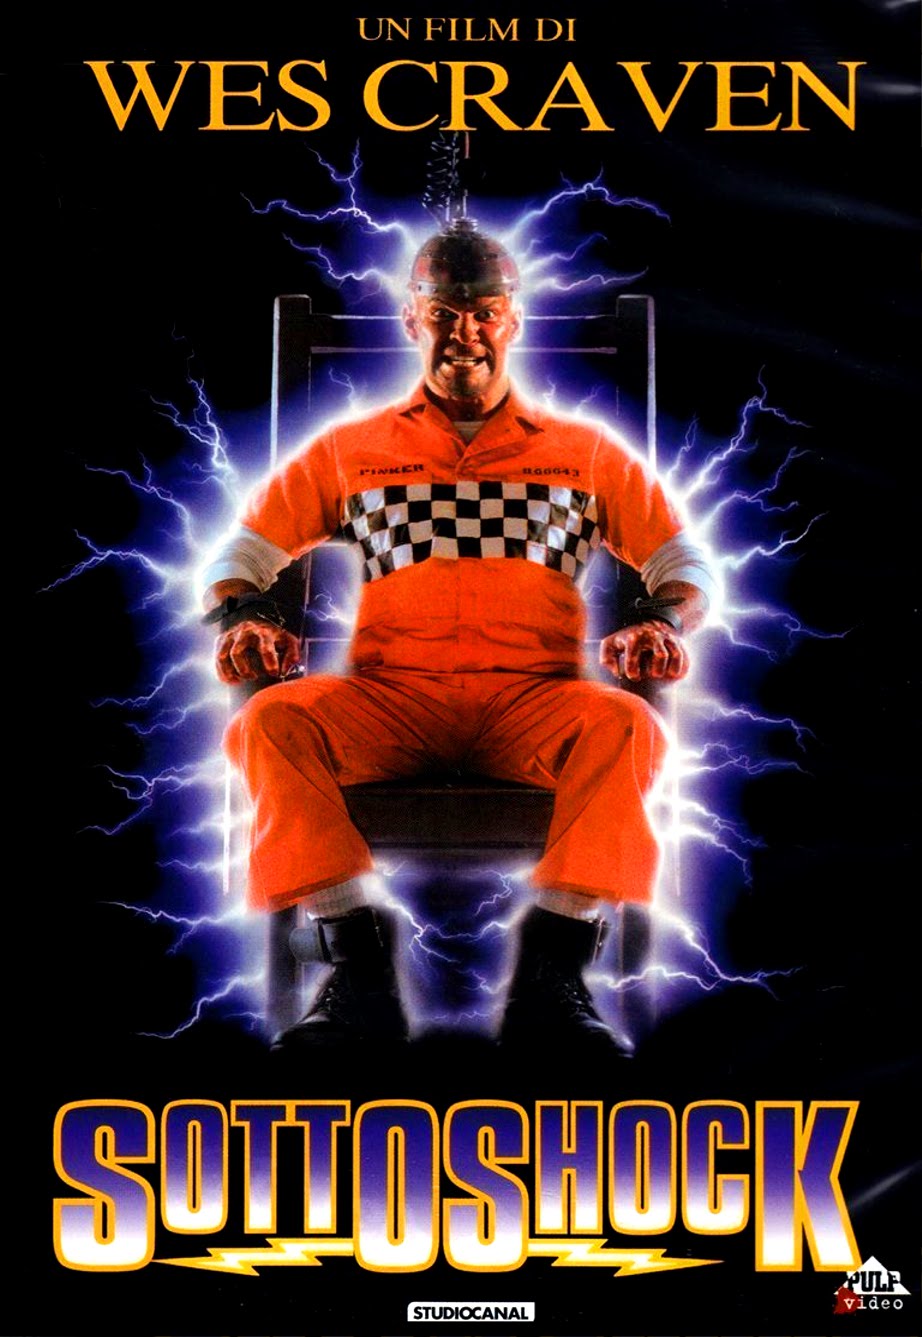 Sotto shock [HD] (1989)